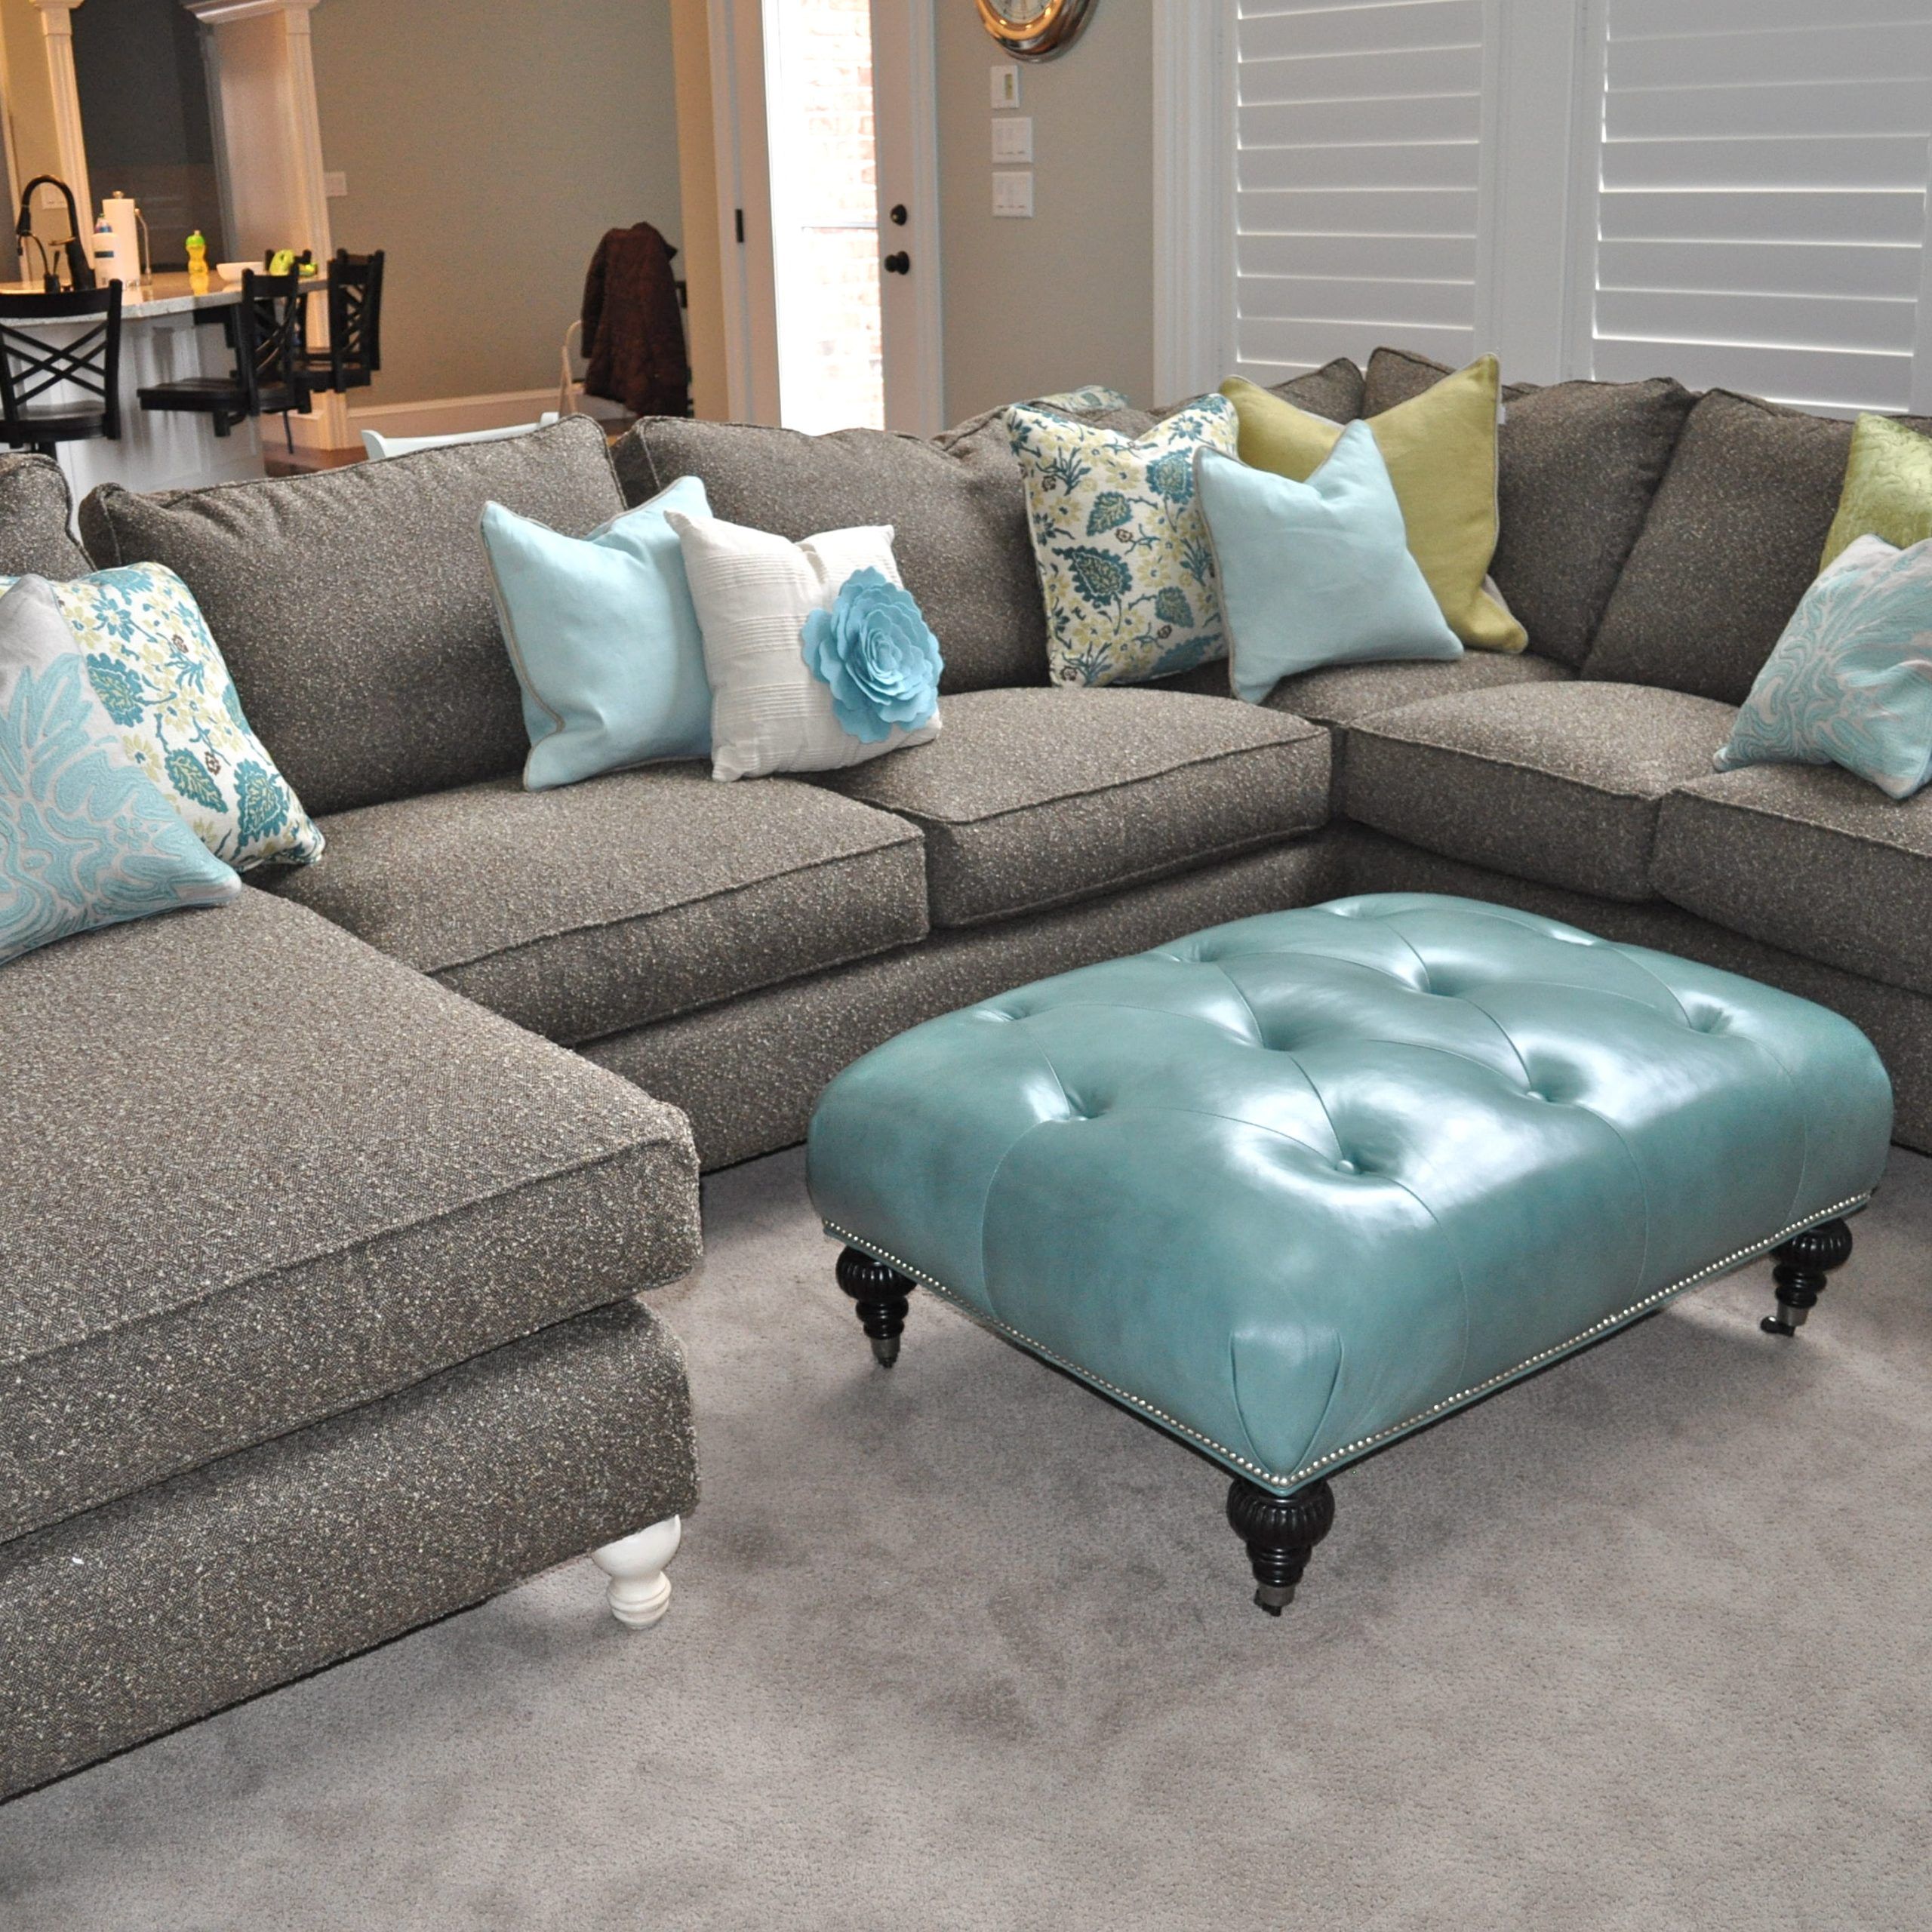 U Shaped Sectional With Chaise Design – Homesfeed Regarding Modern U Shape Sectional Sofas In Gray (View 6 of 20)